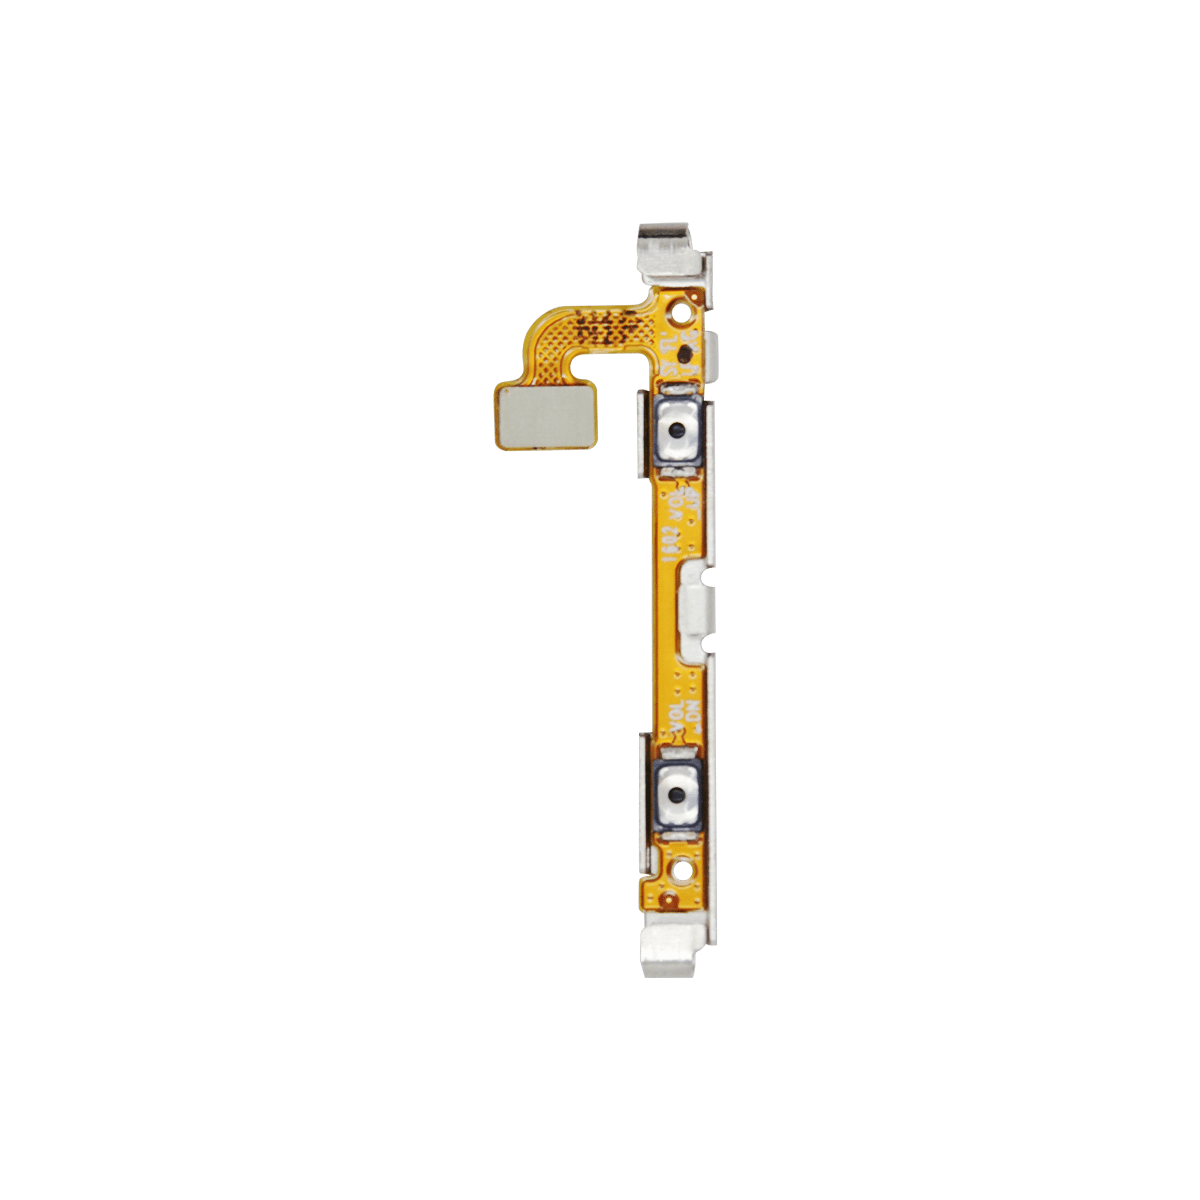 Samsung Galaxy S7 Volume Buttons Flex Cable Replacement